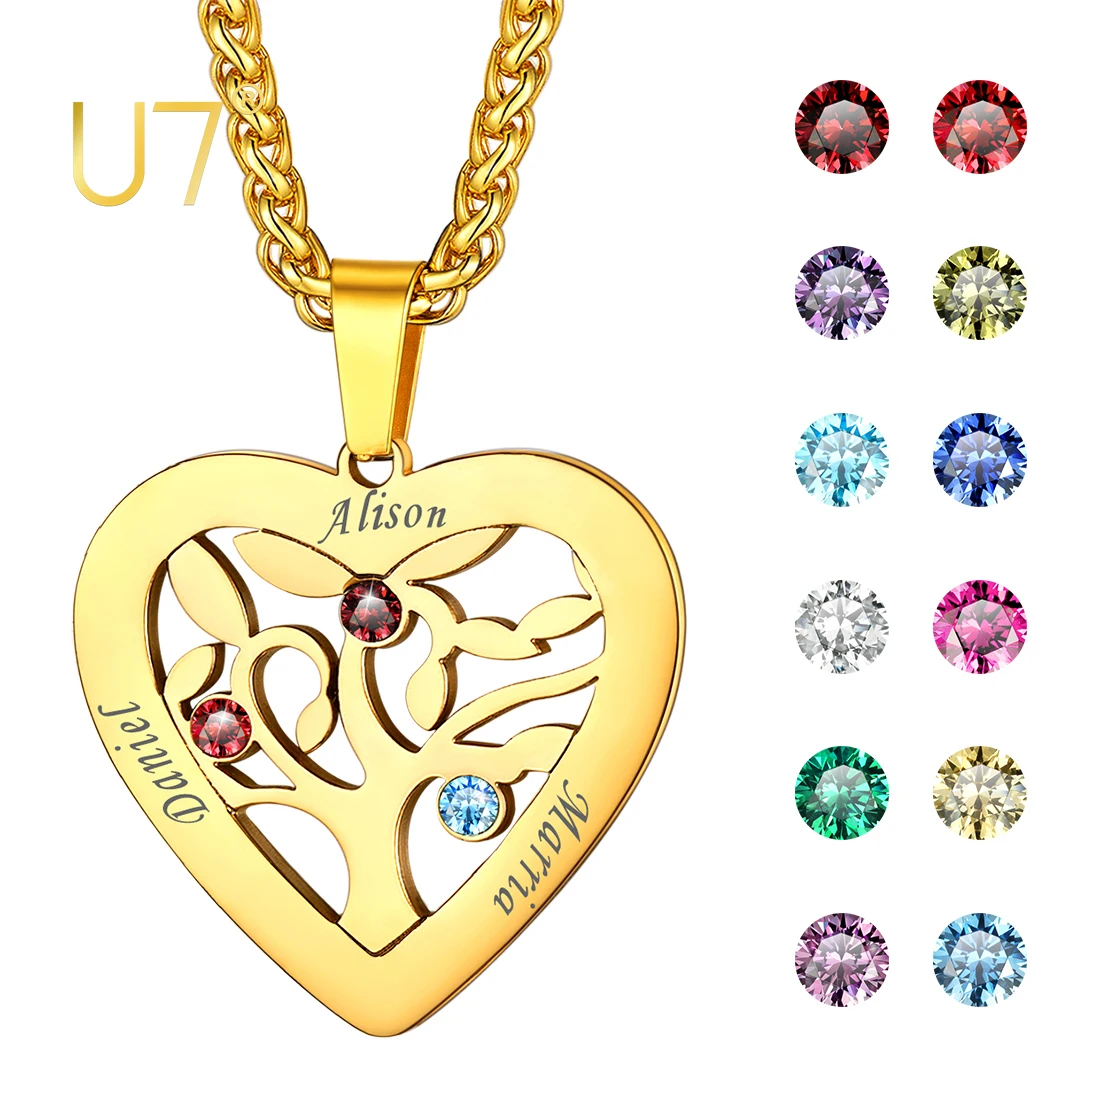 U7 Heart Pendant Necklace Personalized Engraved Stainless Steel Jewelry Friend Family Names Birthstone Gift for Women Girls personalized animals metal bookmarks custom dog photo bookmark pet picture book page marker straight ruler gift for friend